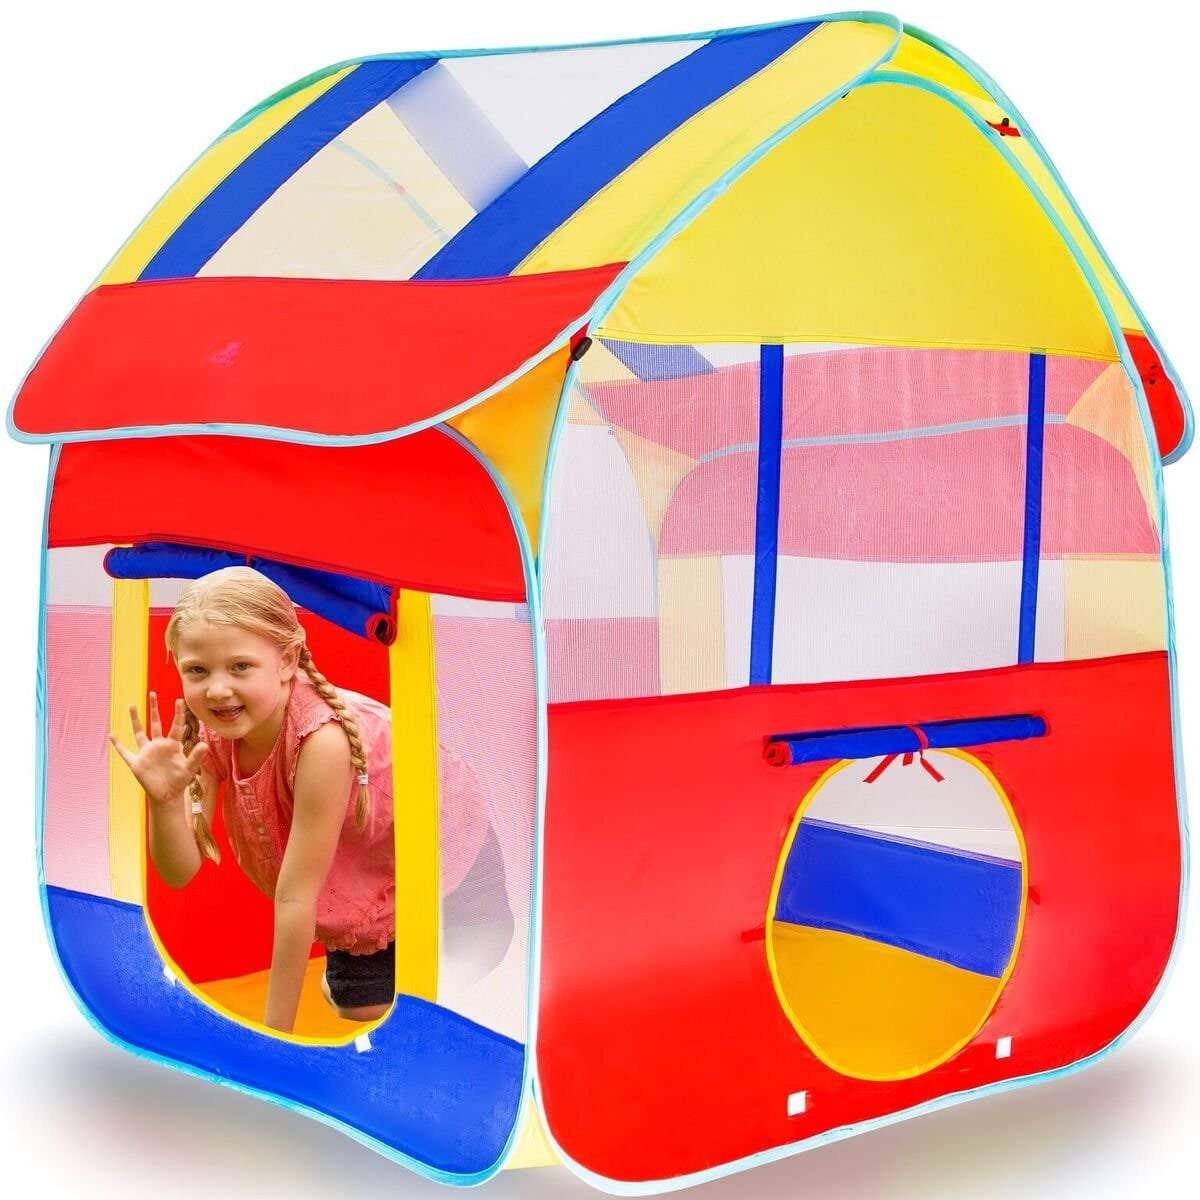 Details about   Alvantor Kids Tent Colorful play house Kids game zone